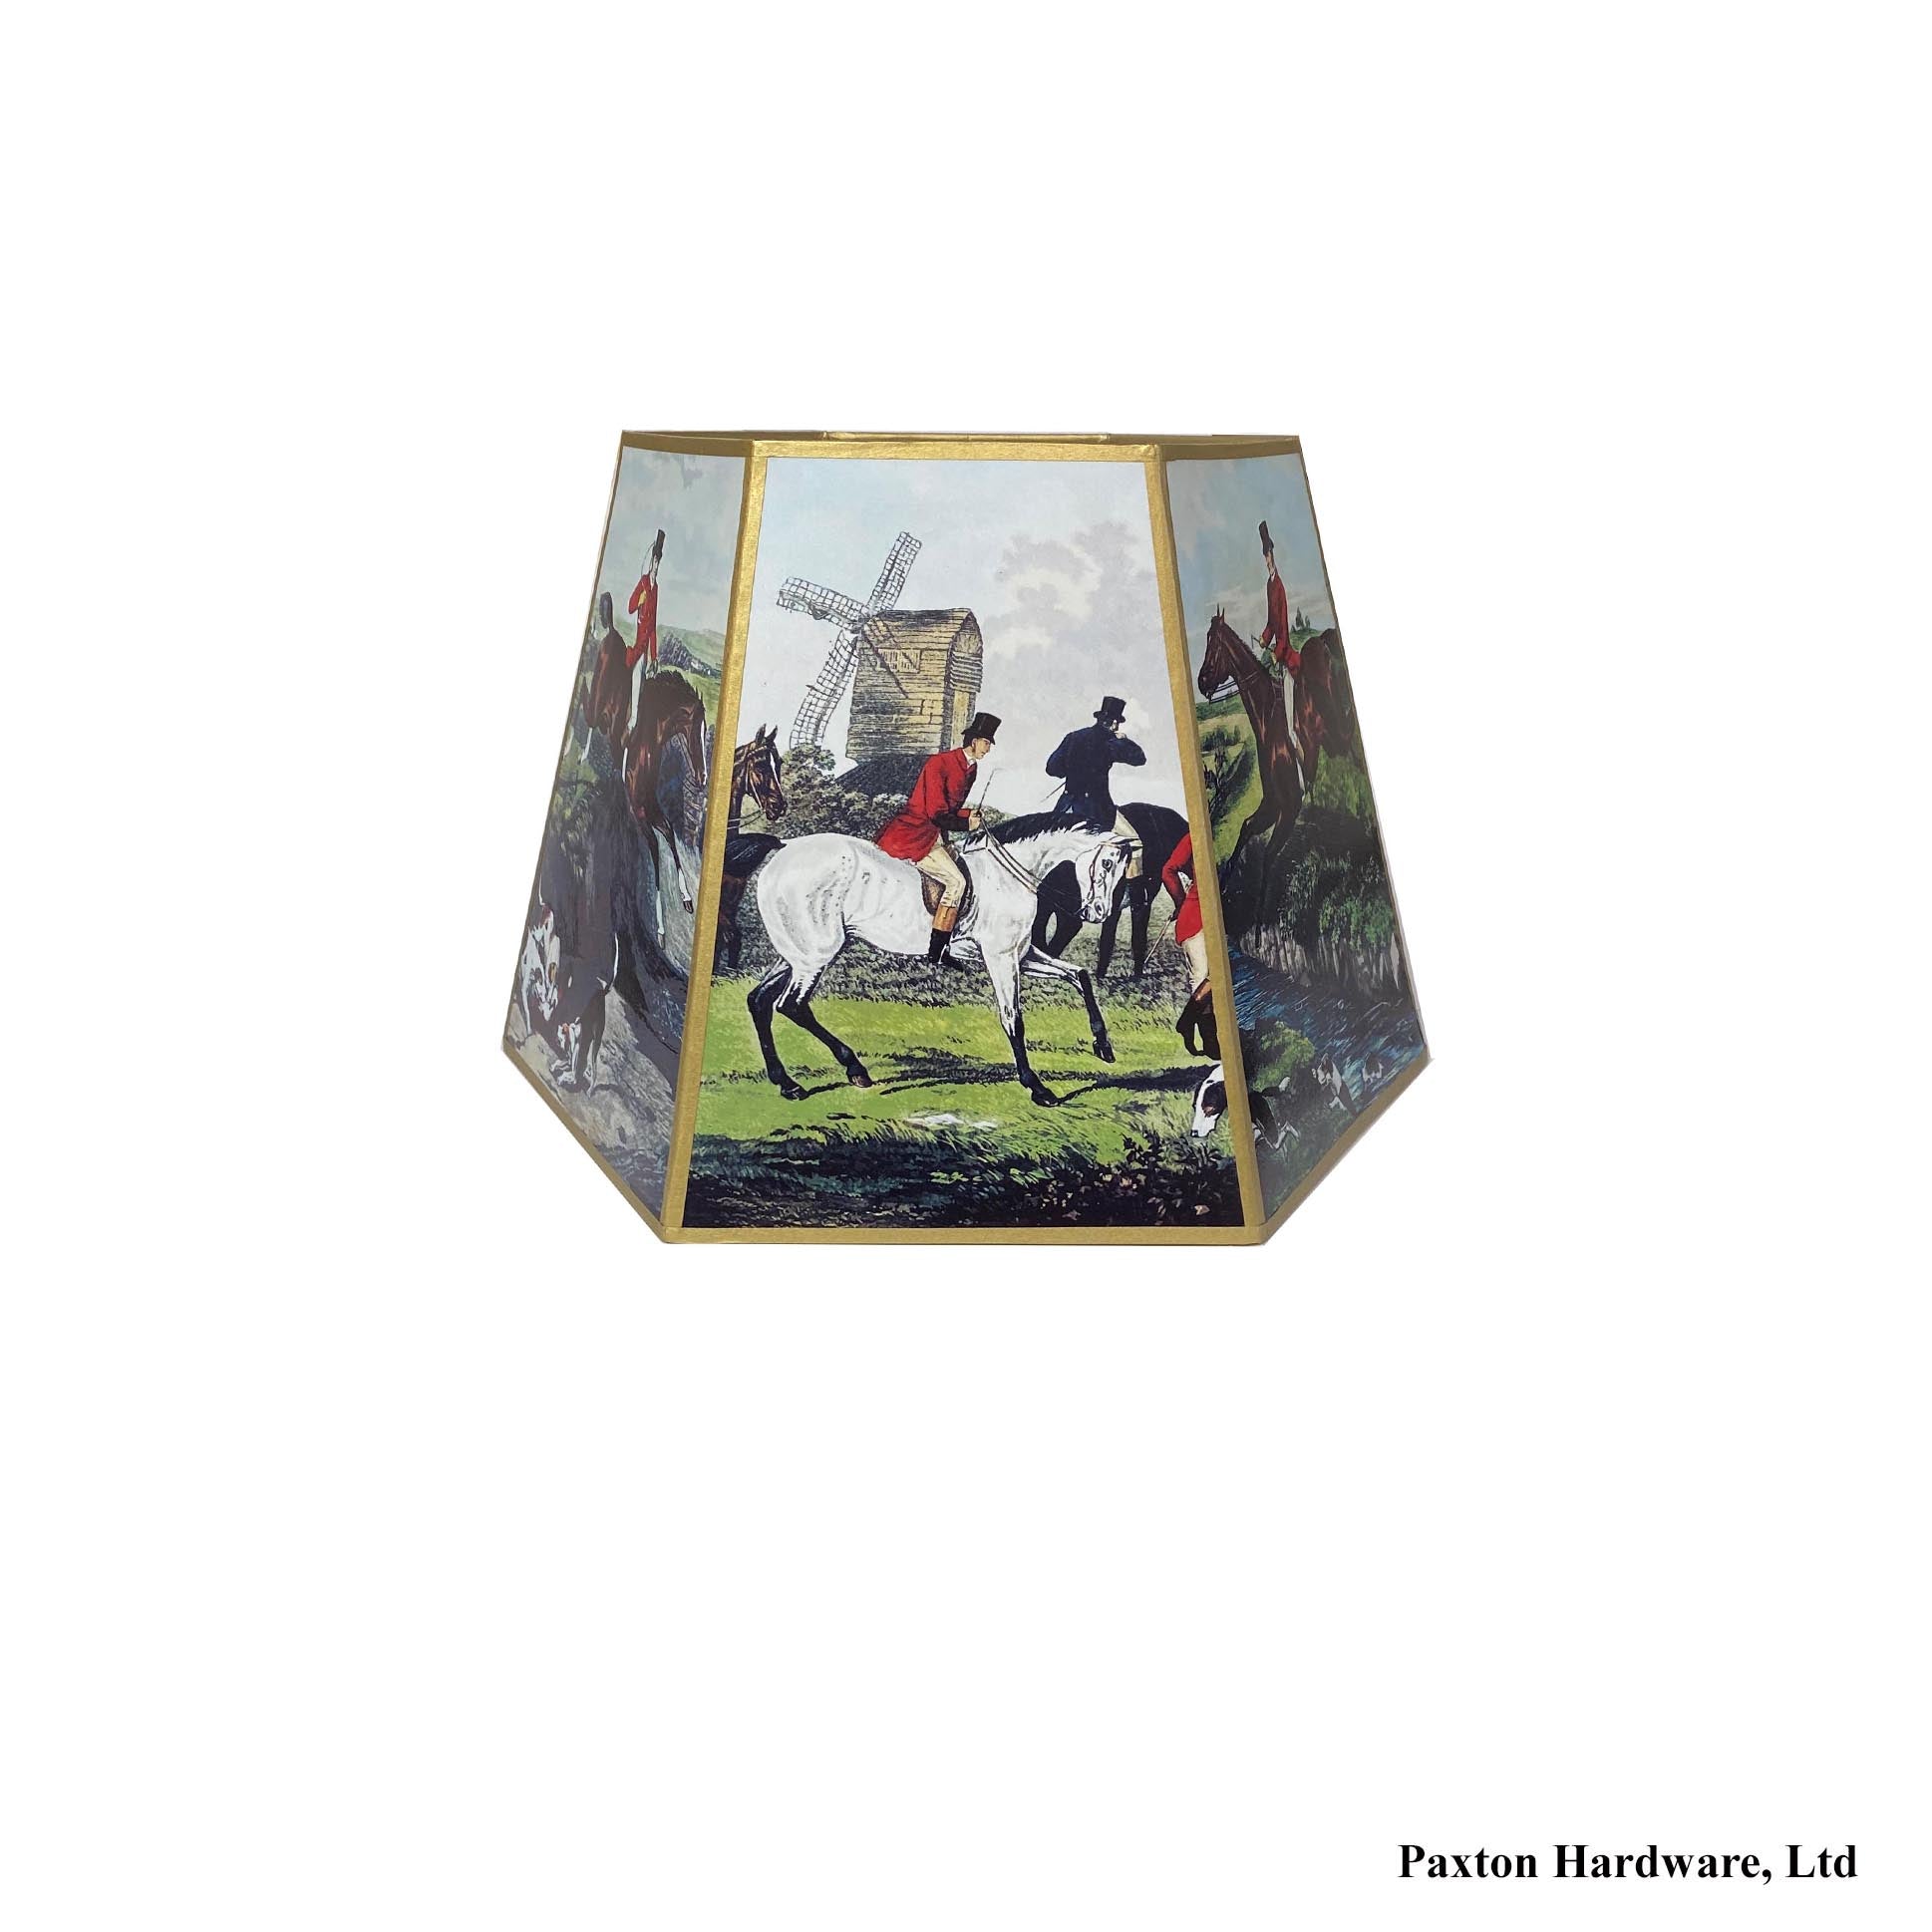 Clip on Lamp Shade with Horses and Hounds, Paxton Hardware